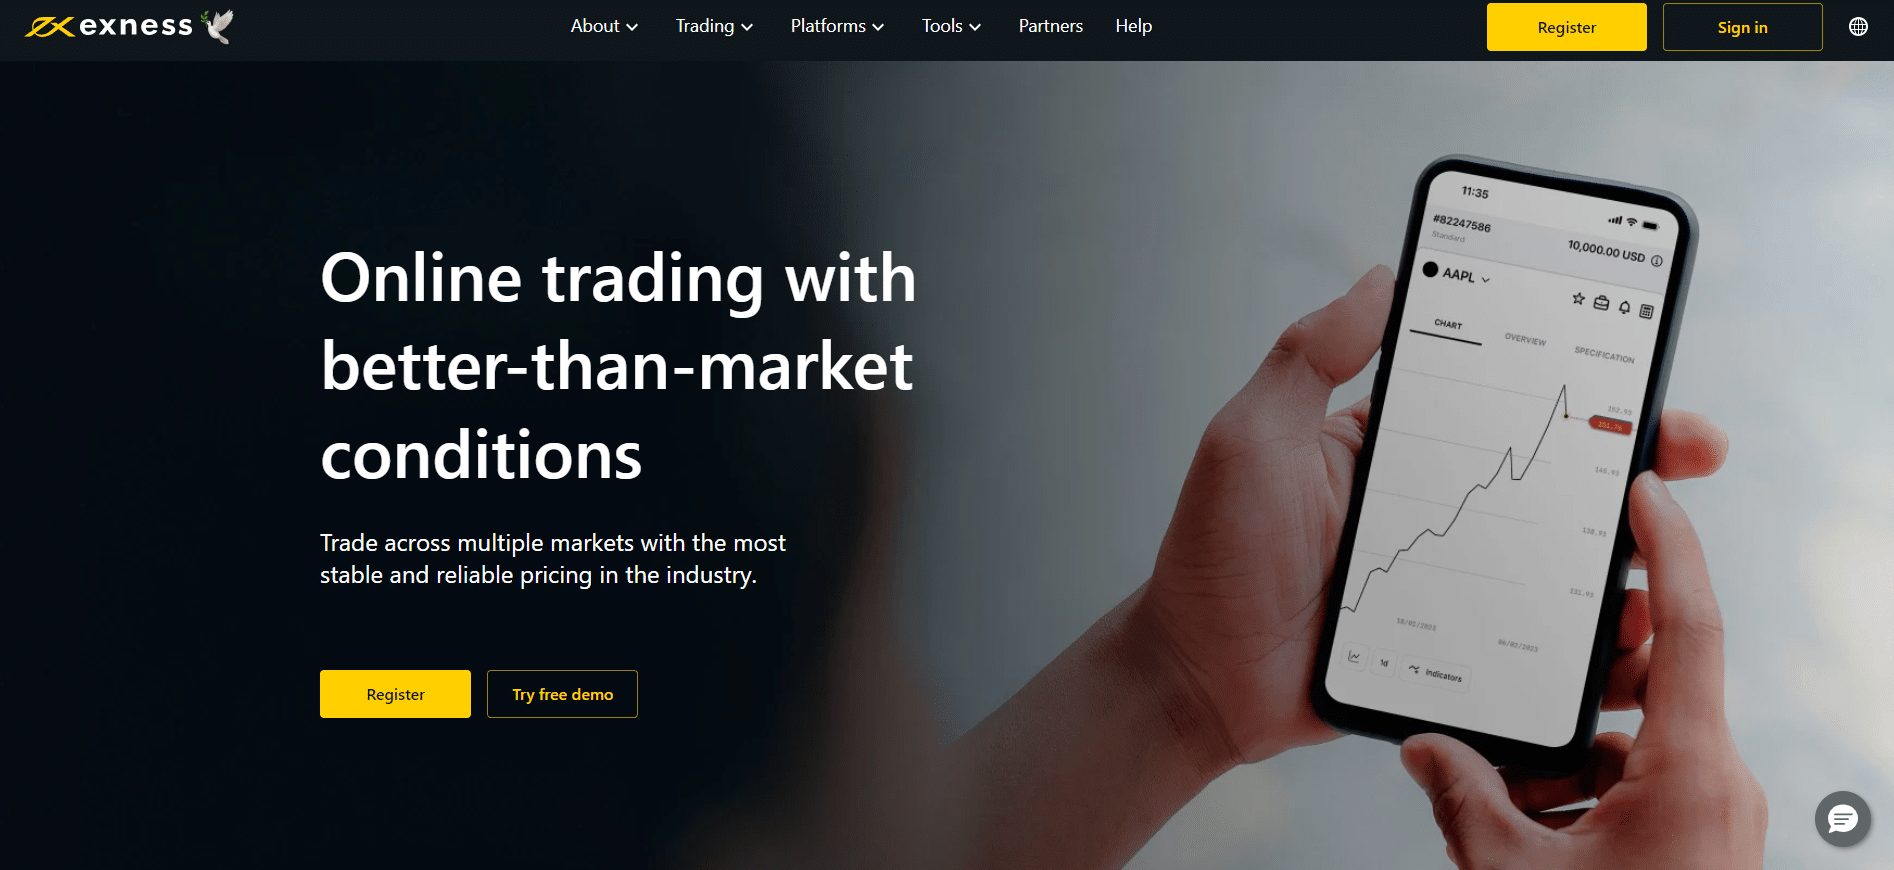 Best Forex Trading App - Exness